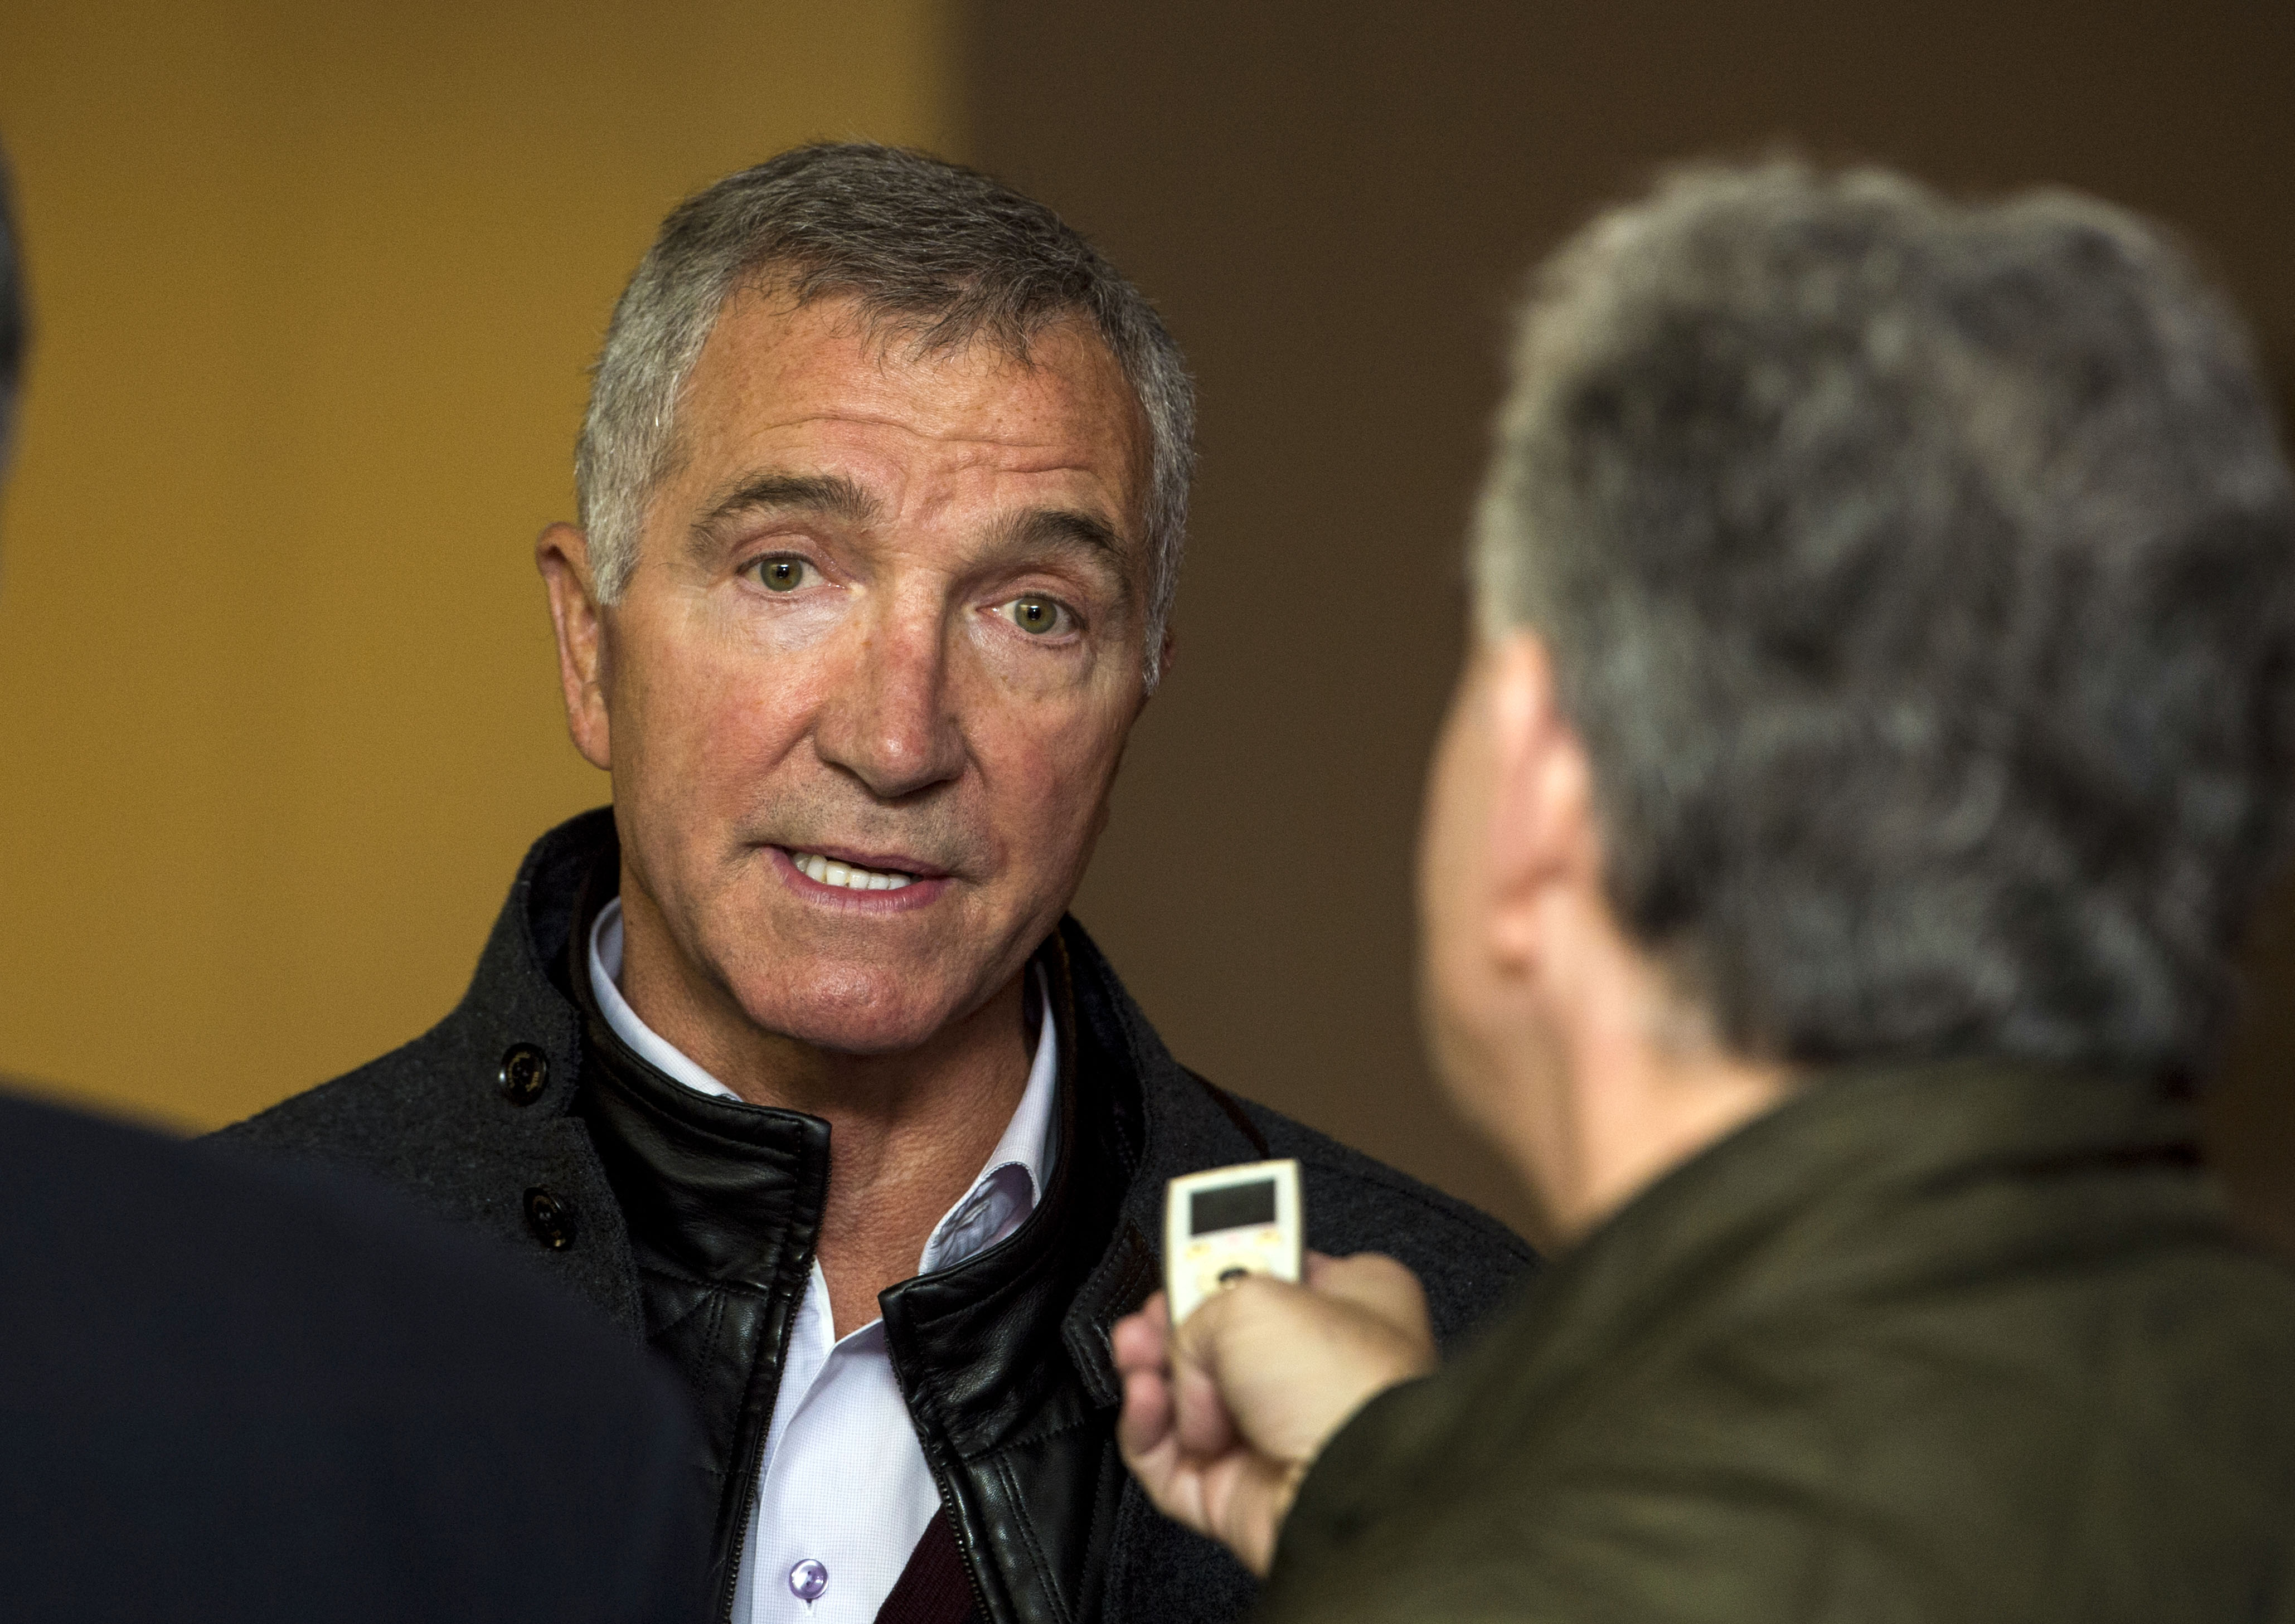 24/10/16 ROYAL CONCERT HALL - GLASGOW Graeme Souness was on hand to promote the inaugural Legends of Football event.